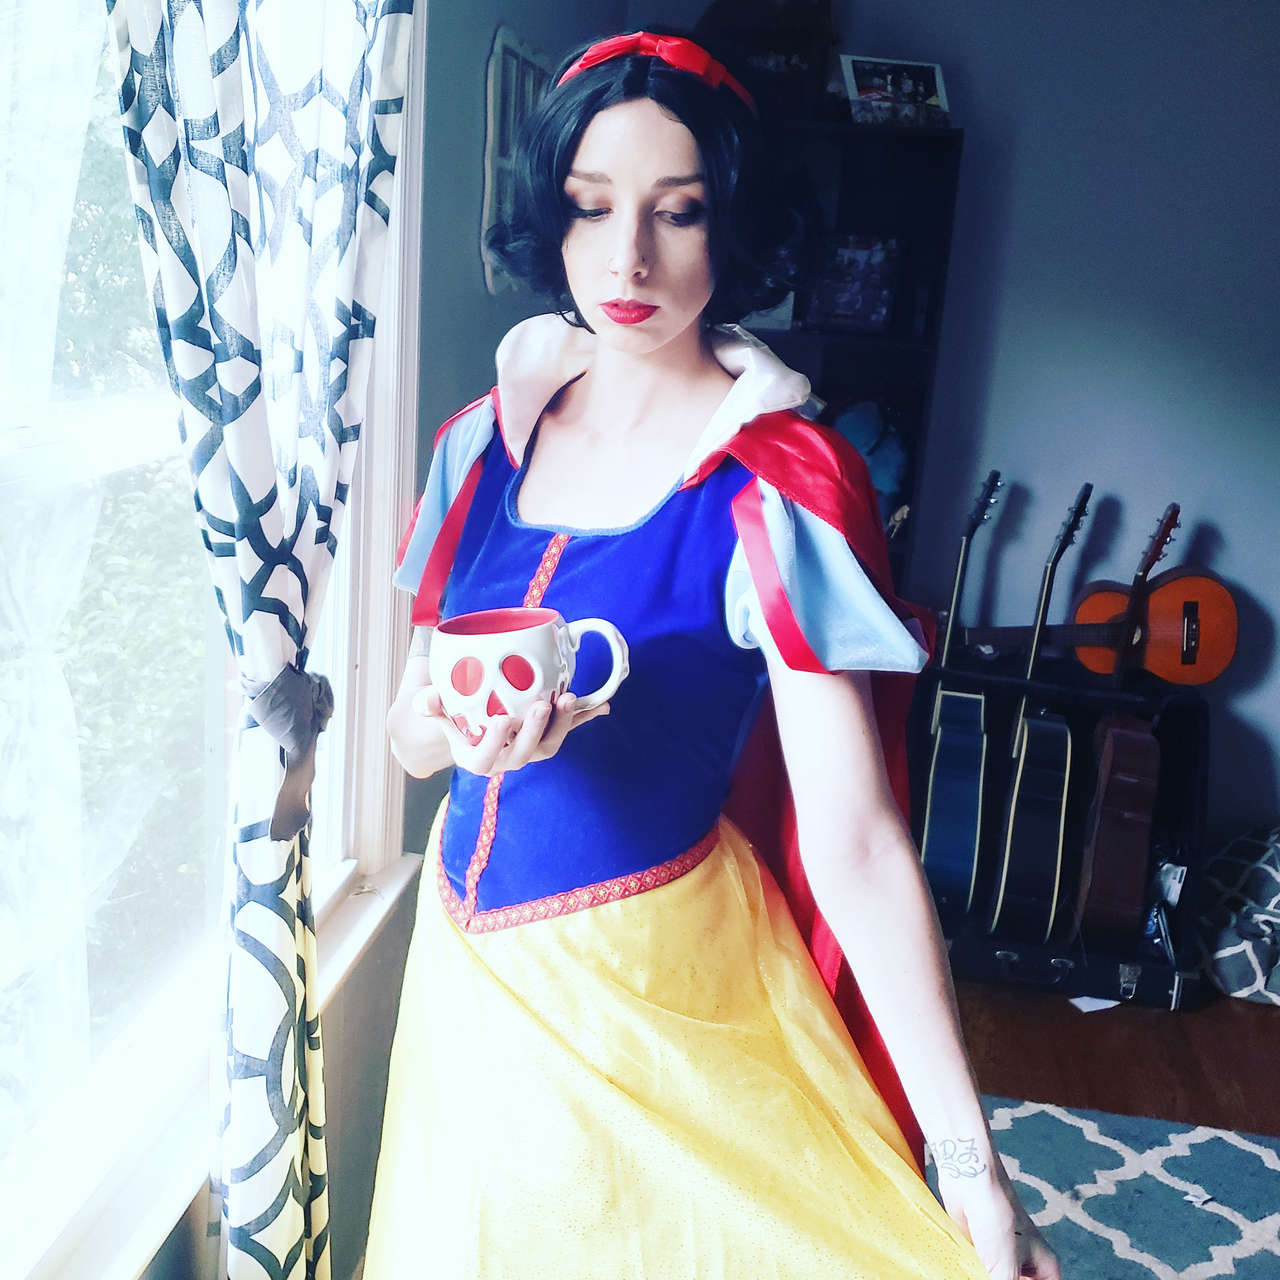 Snow White Before After The Huntsman By Holdinholden